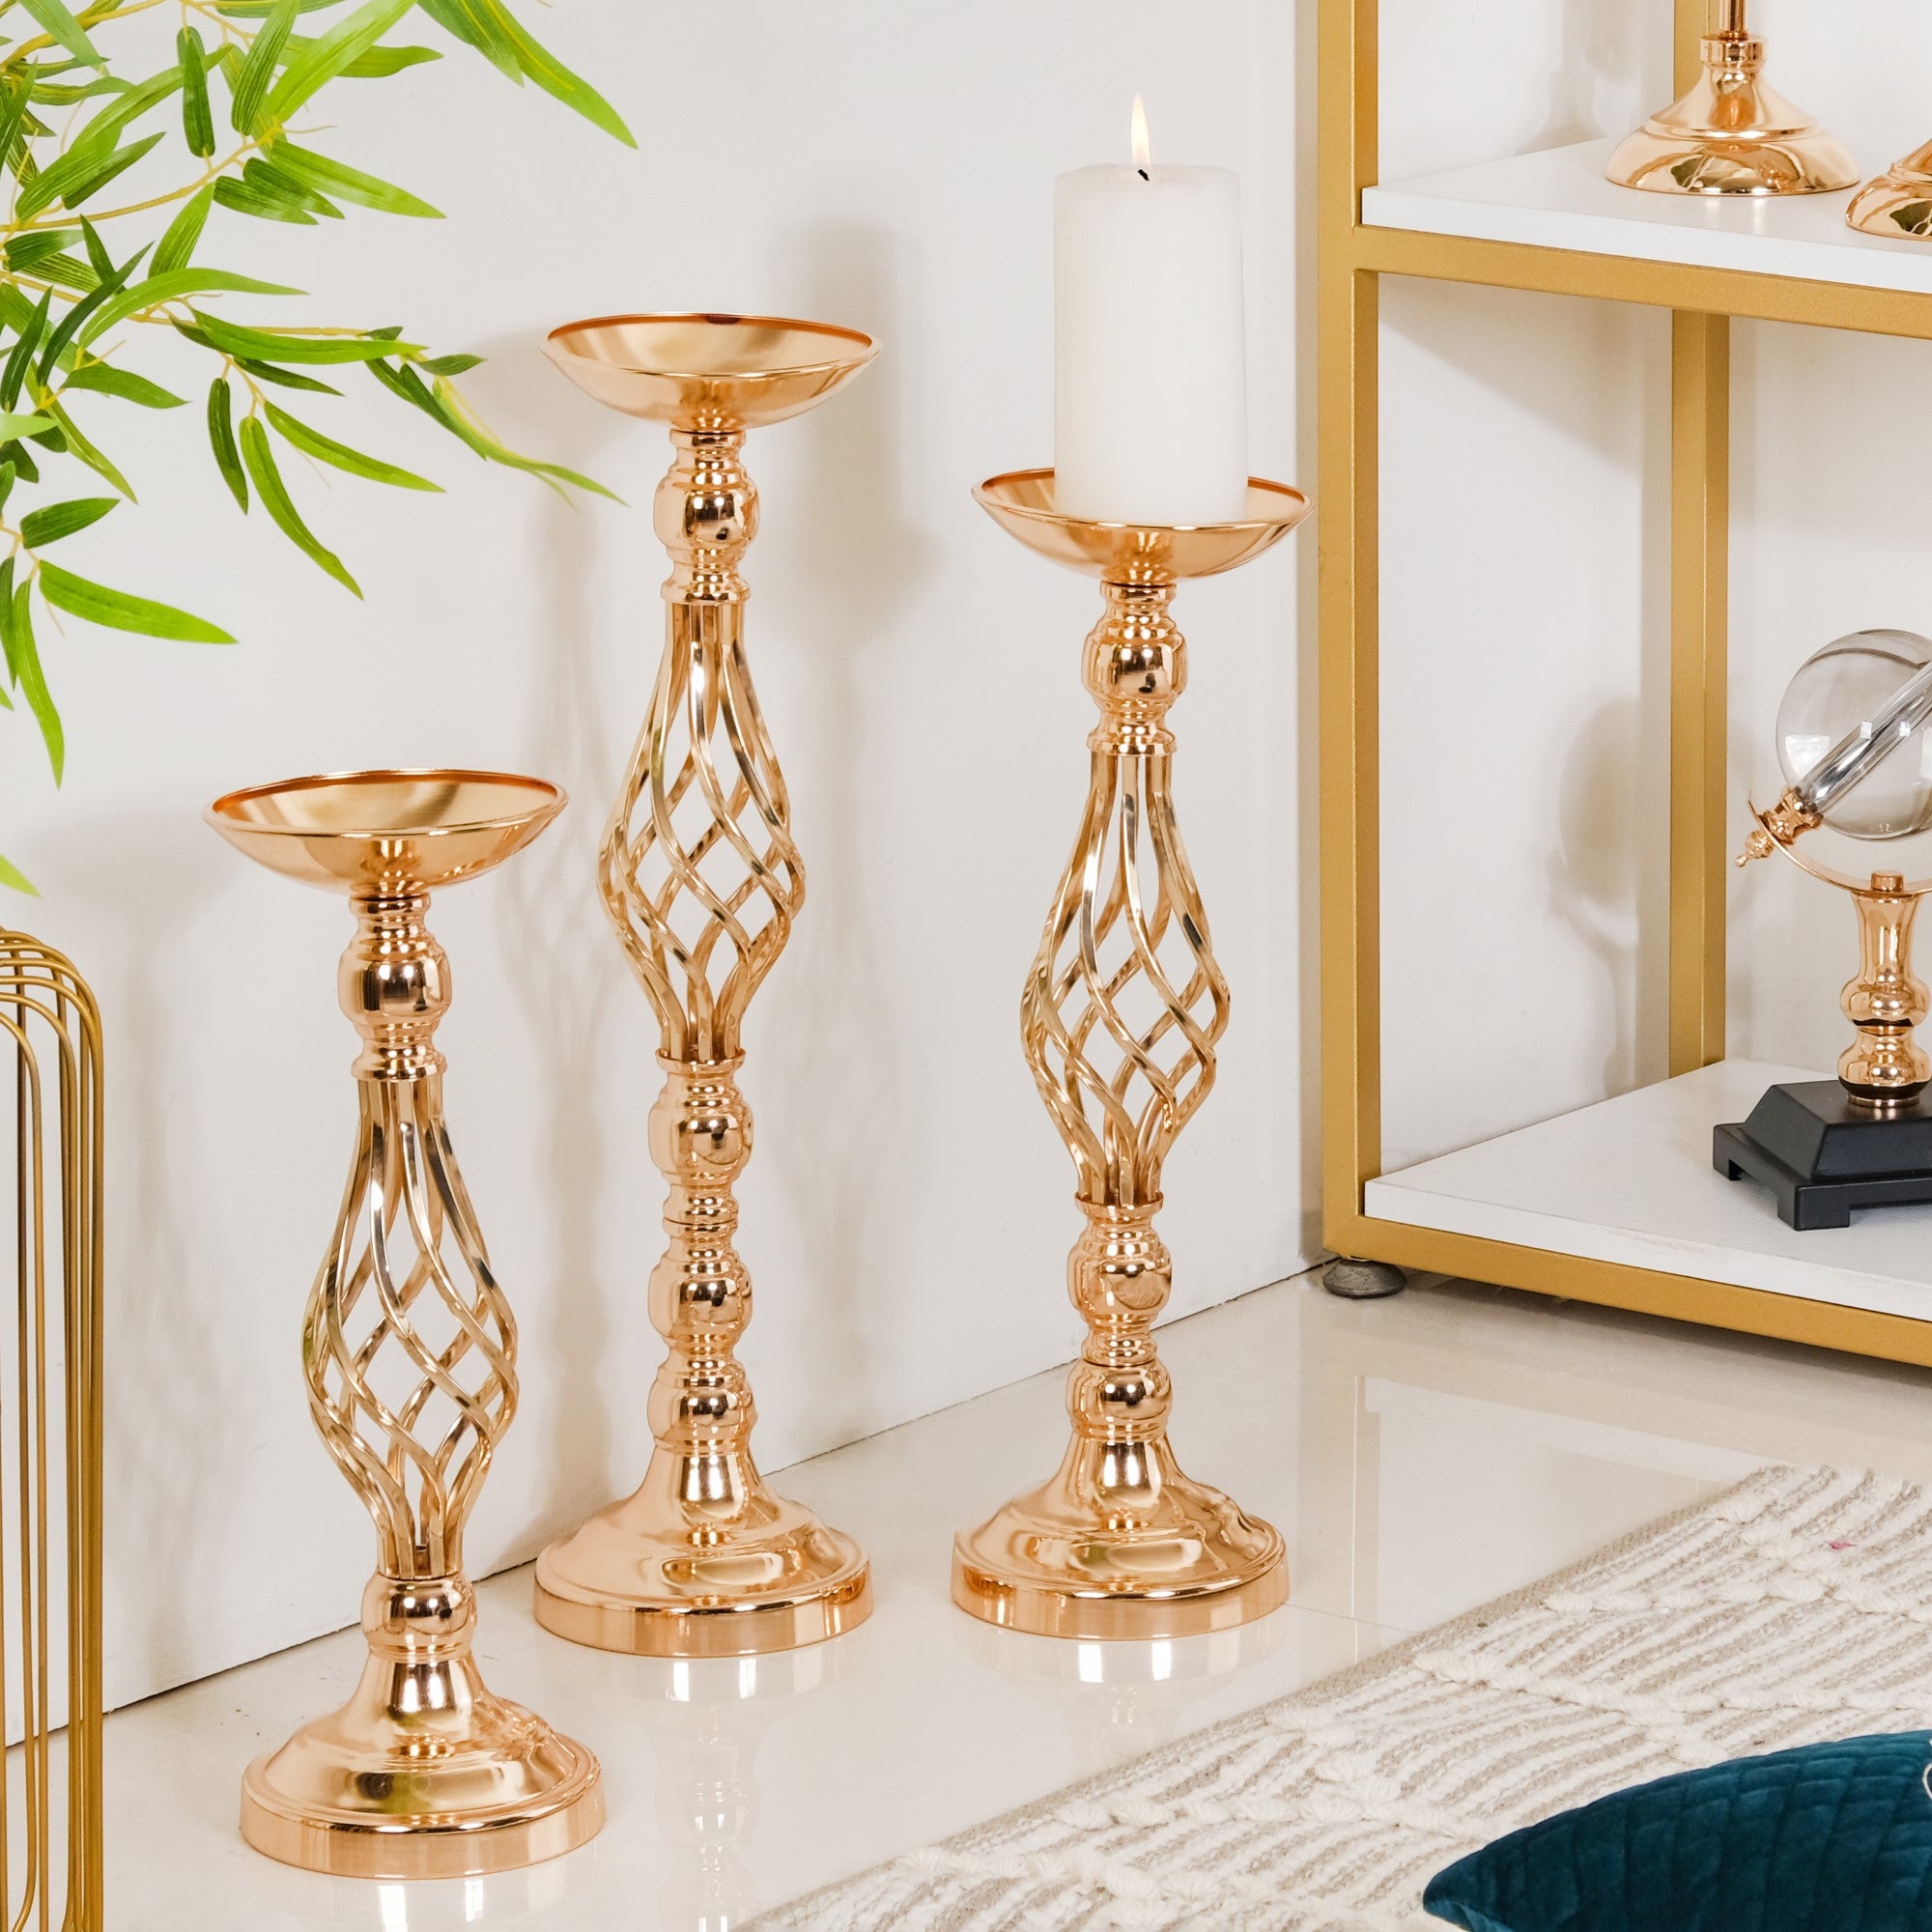 Candle Stand - Buy Tall Floor Candle Stand Set Online